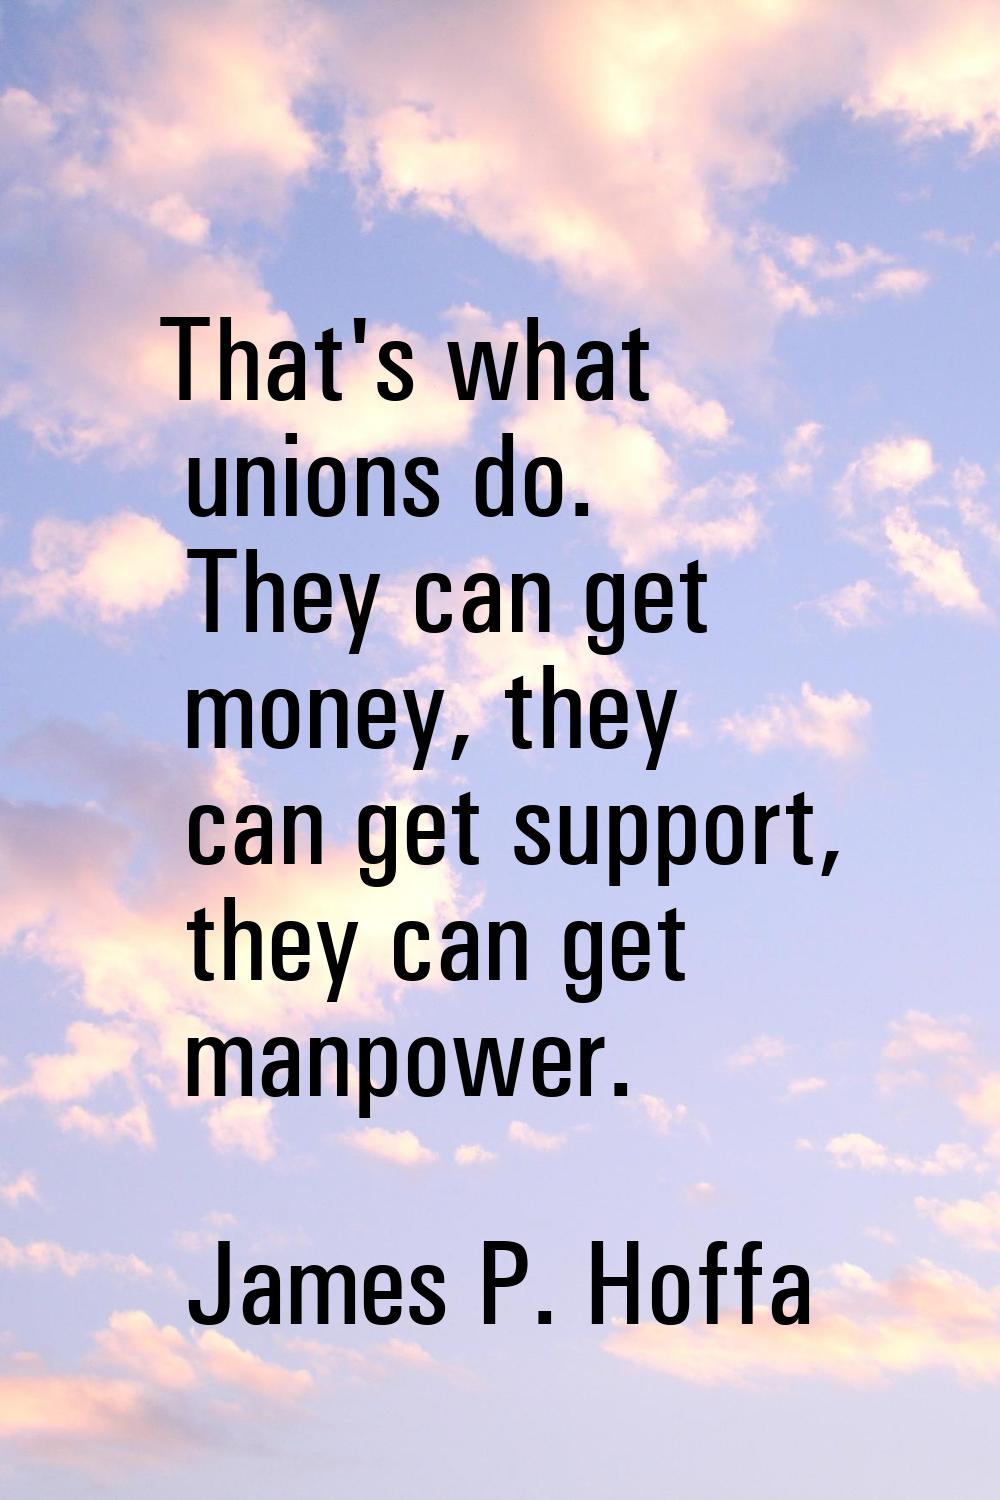 That's what unions do. They can get money, they can get support, they can get manpower.